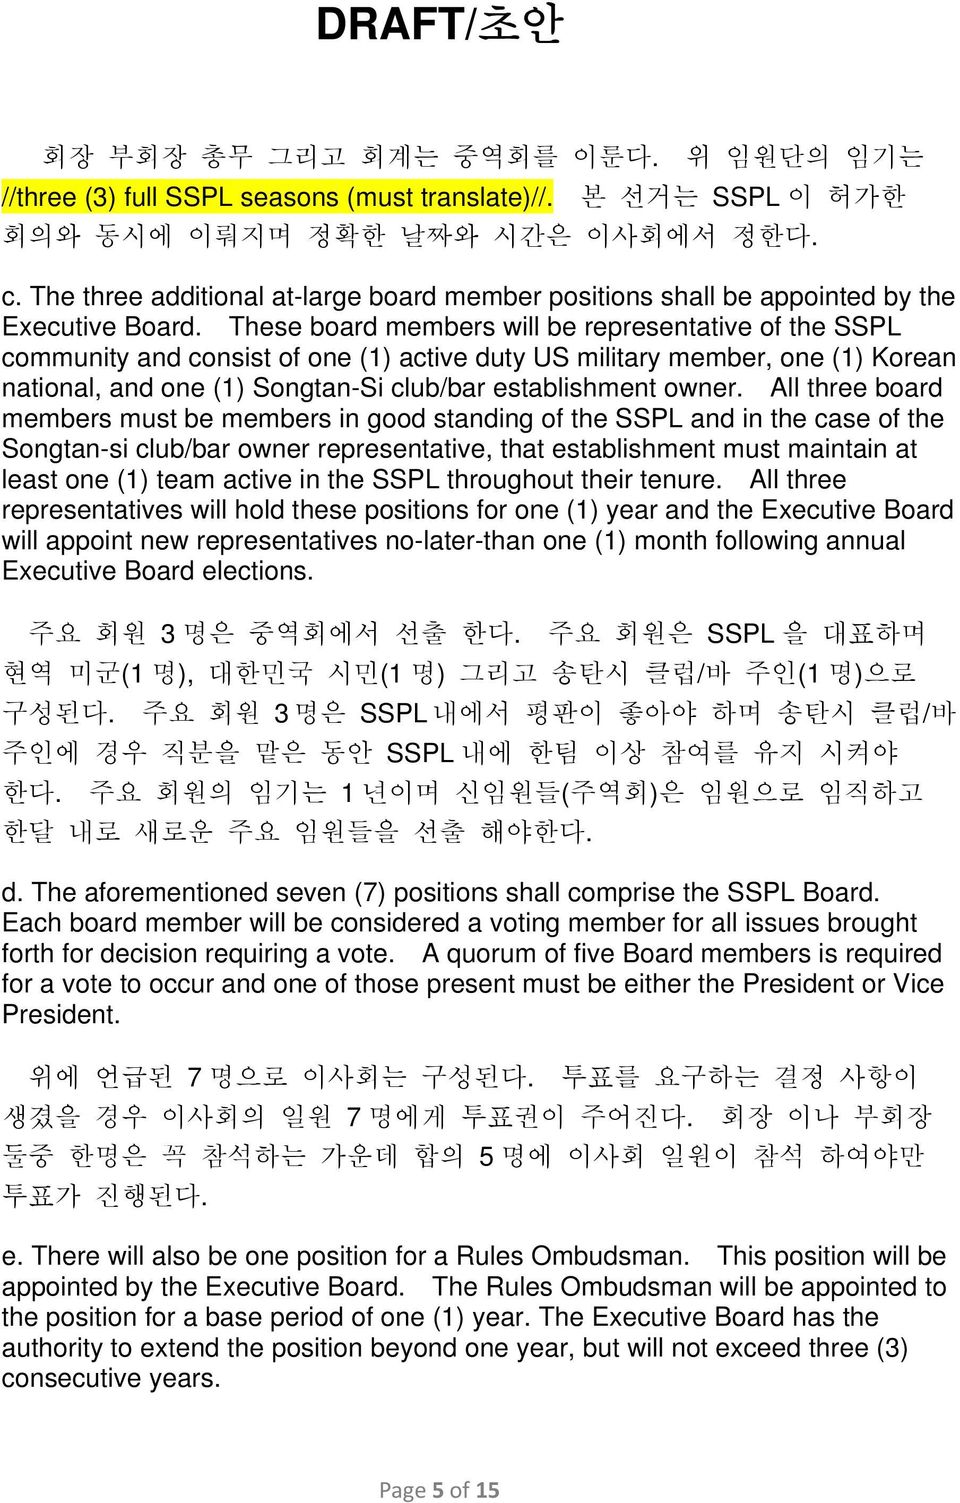 These board members will be representative of the SSPL community and consist of one (1) active duty US military member, one (1) Korean national, and one (1) Songtan-Si club/bar establishment owner.